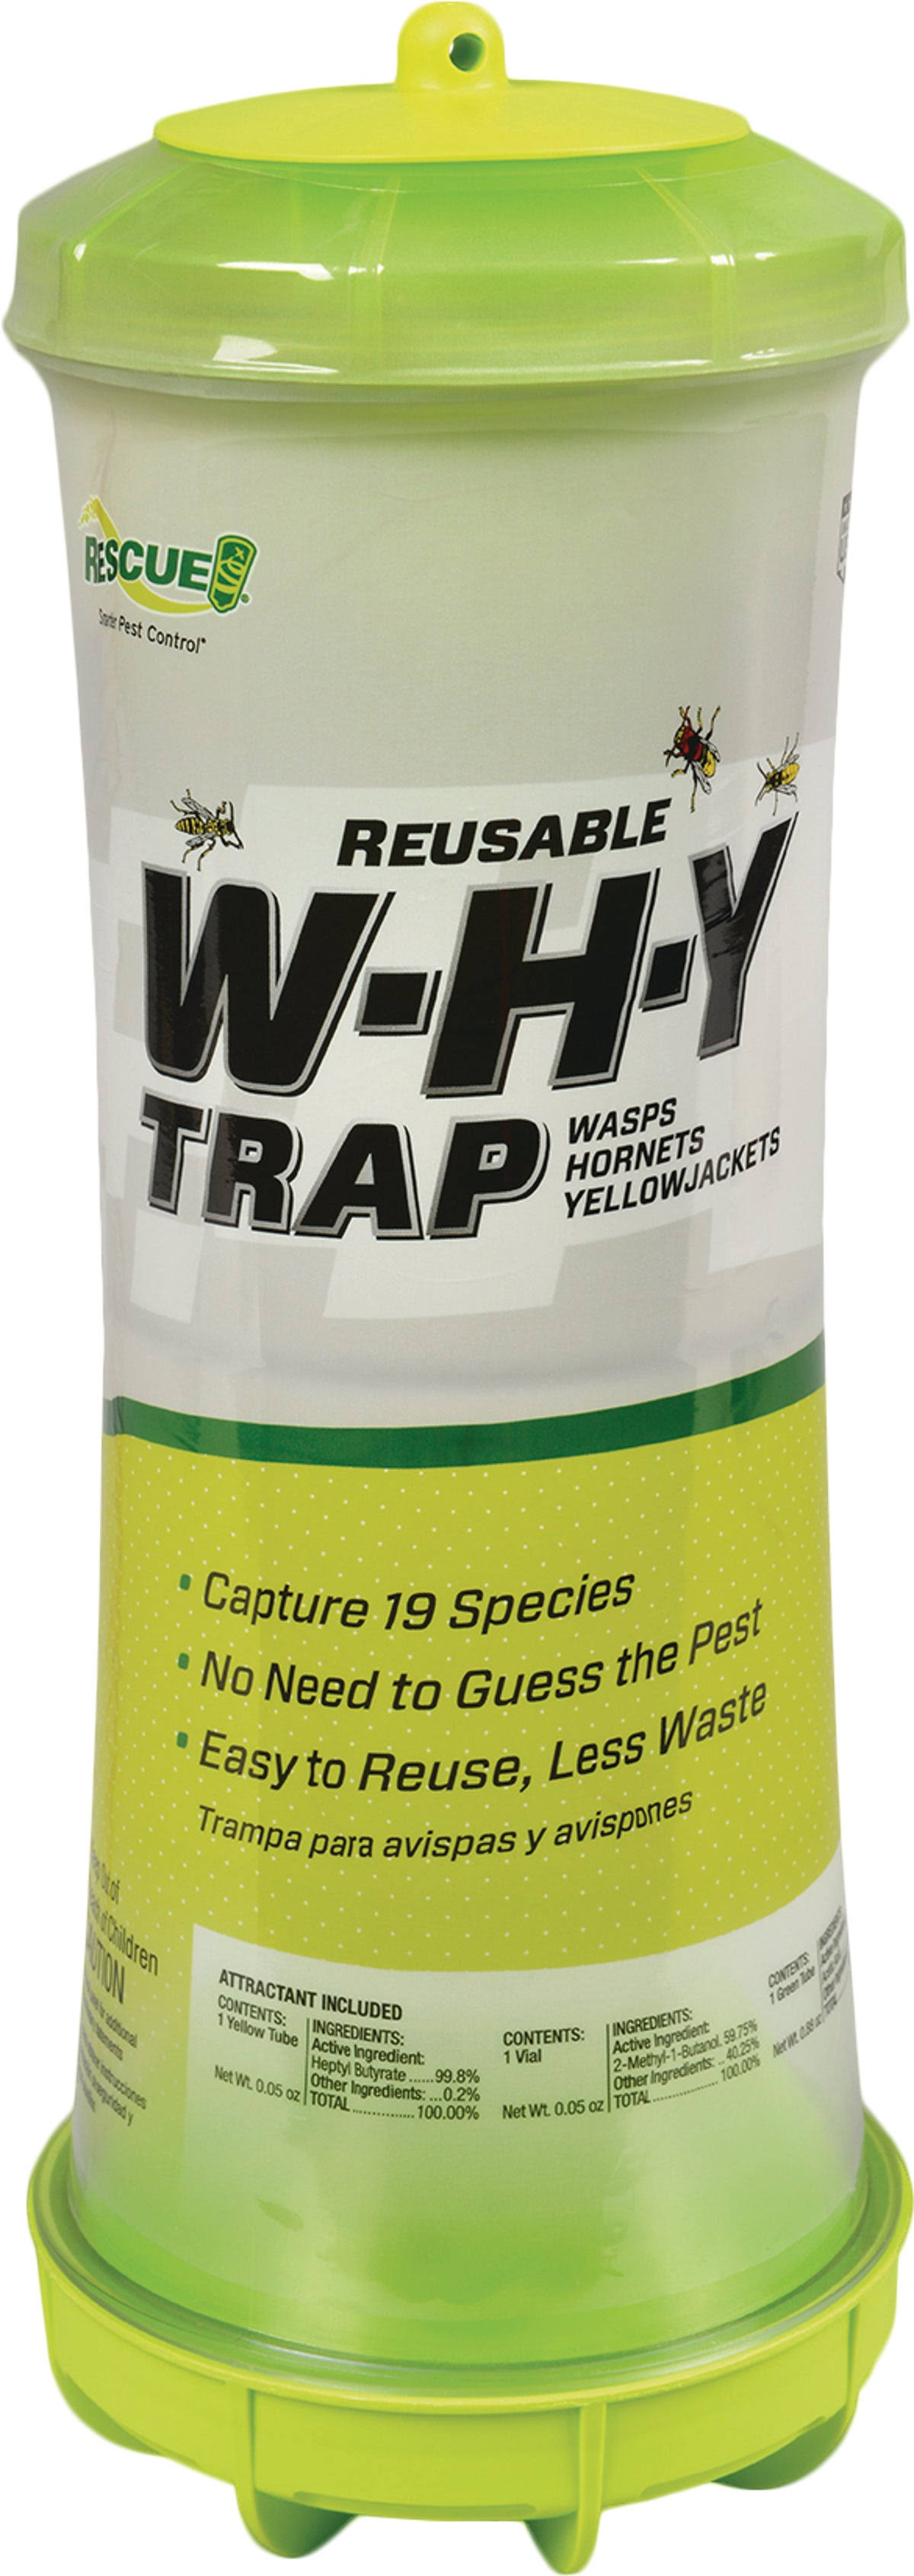 Rescue! Why Trap Non-Toxic Reusable Trap for Wasps, Hornets and Yellow Jackets